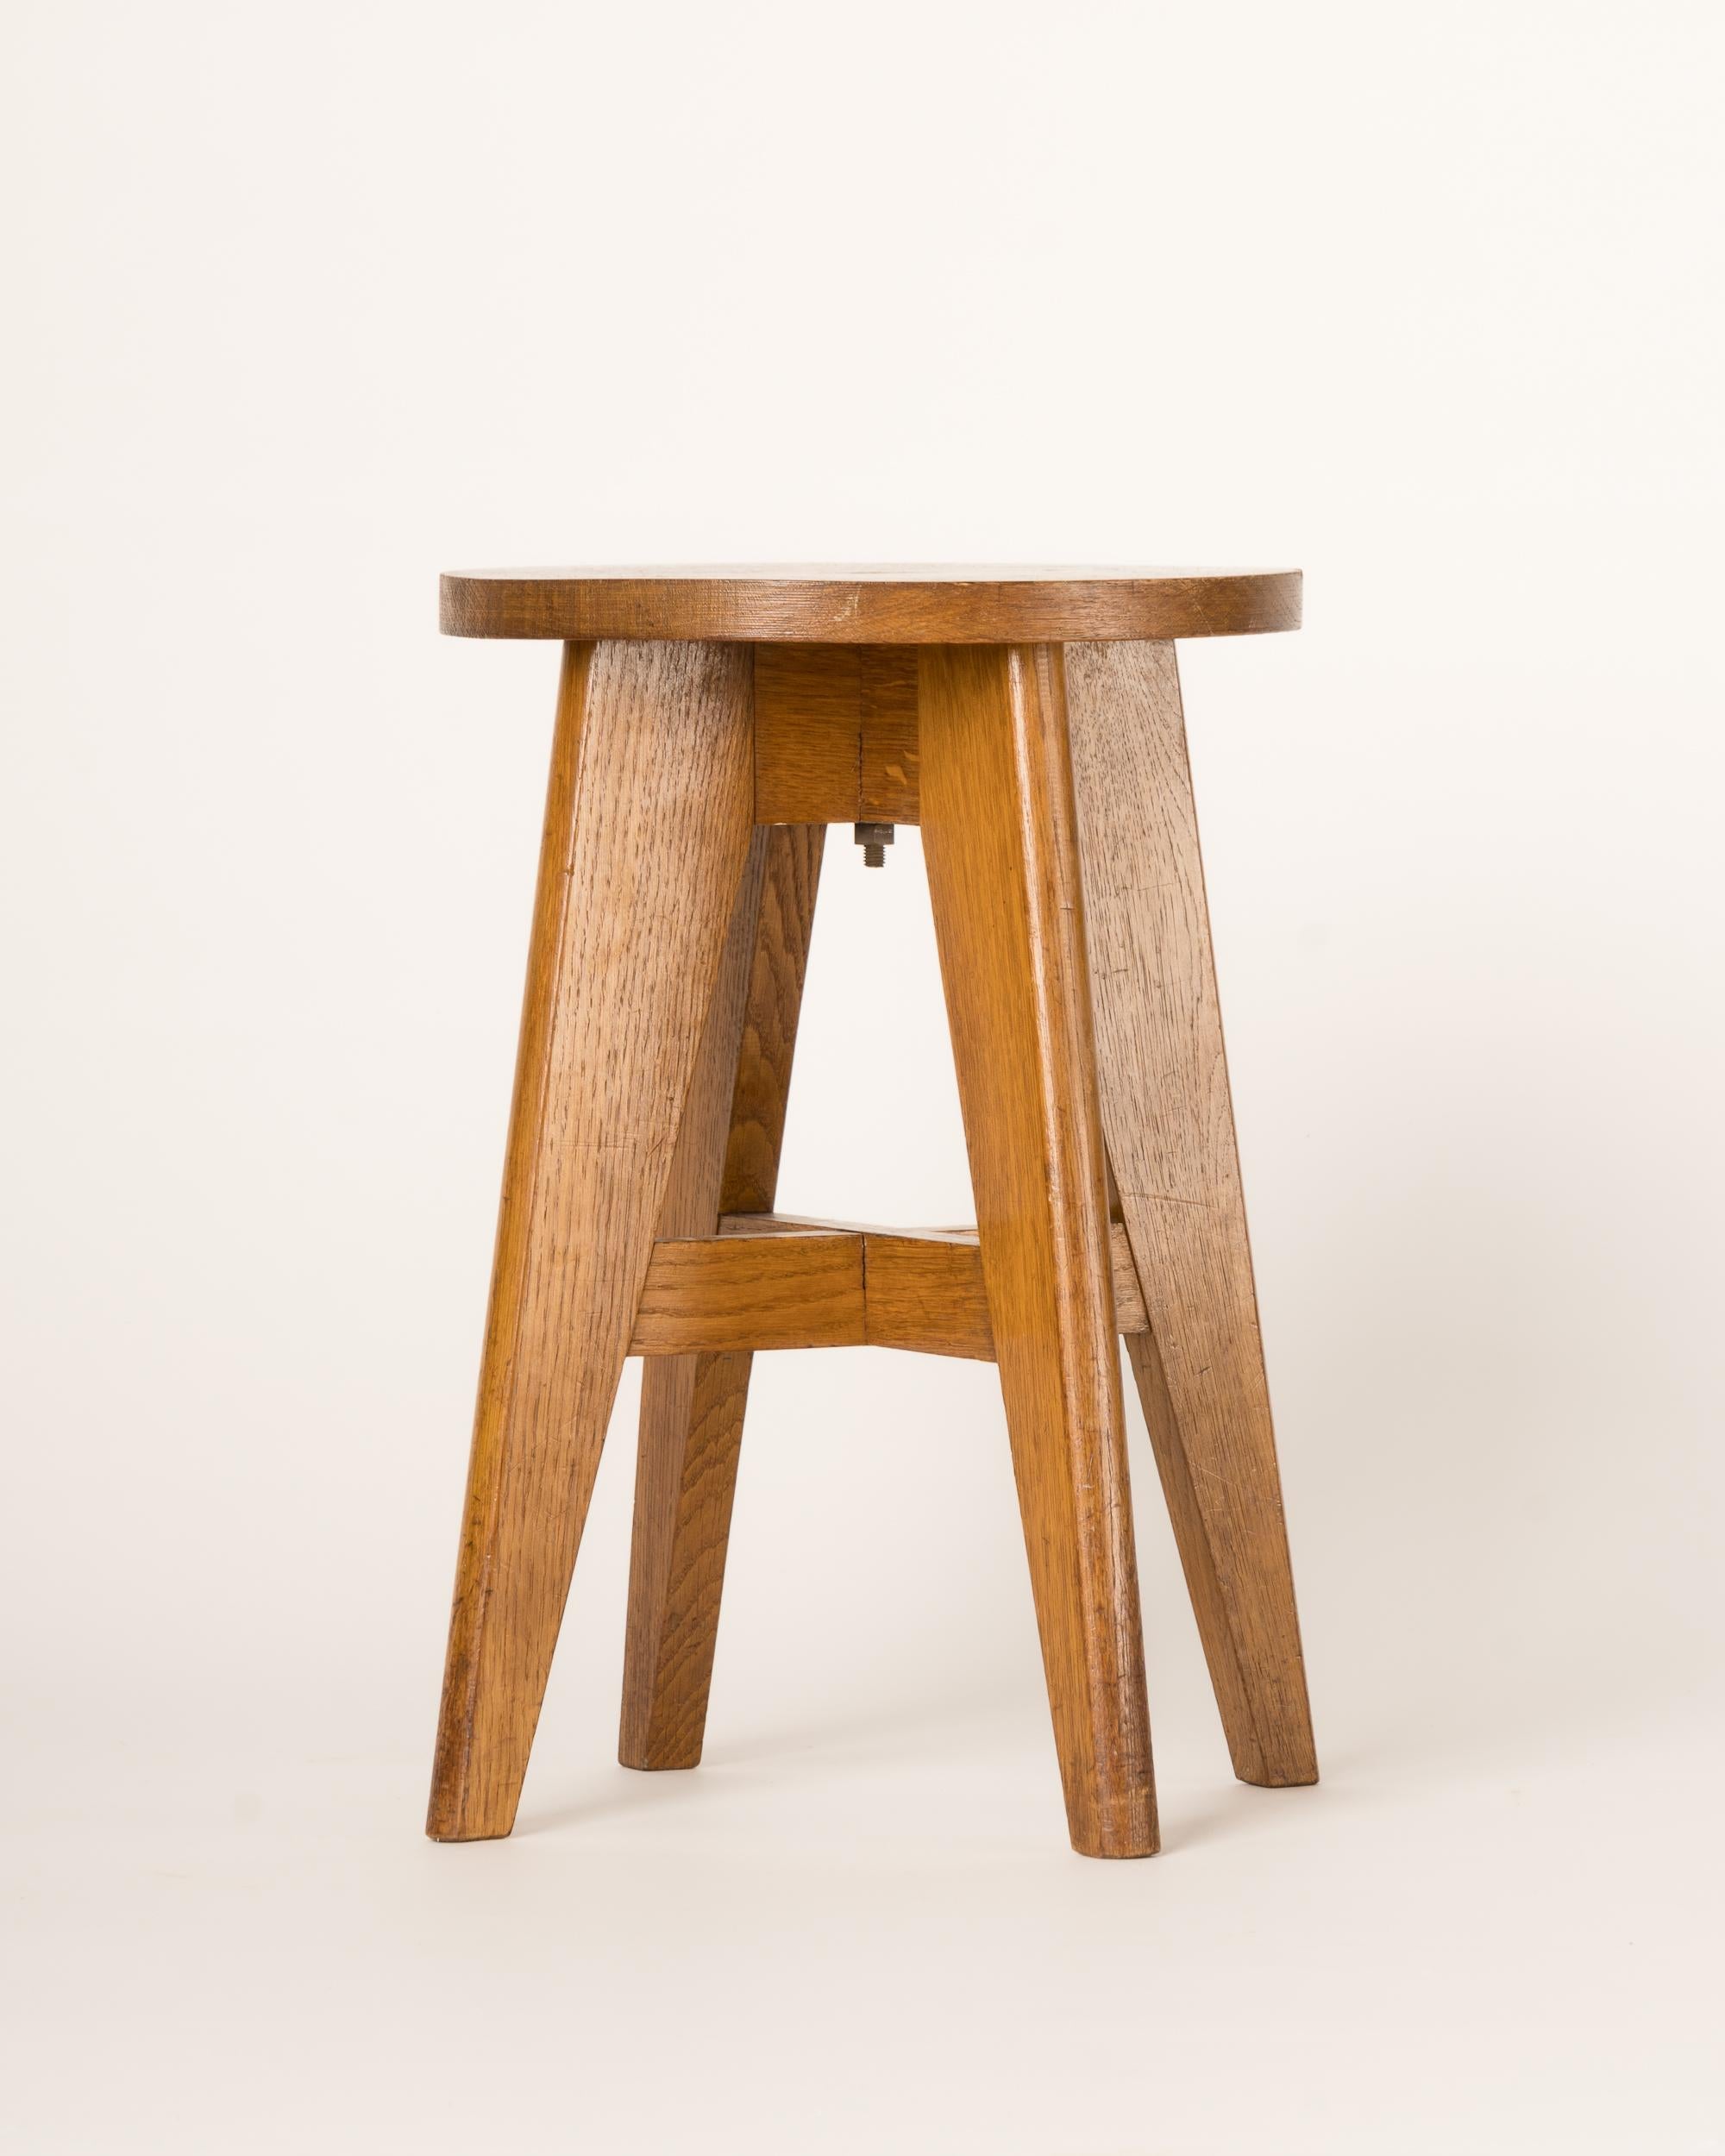 A minimalist solid oak four legged stool with a brass screw on top. In the style of Pierre Jeanneret. A second identical stool is available but currently upholstered with a leatherette top (needs to be re-upholstered). 
Sturdy. Some stains on top.